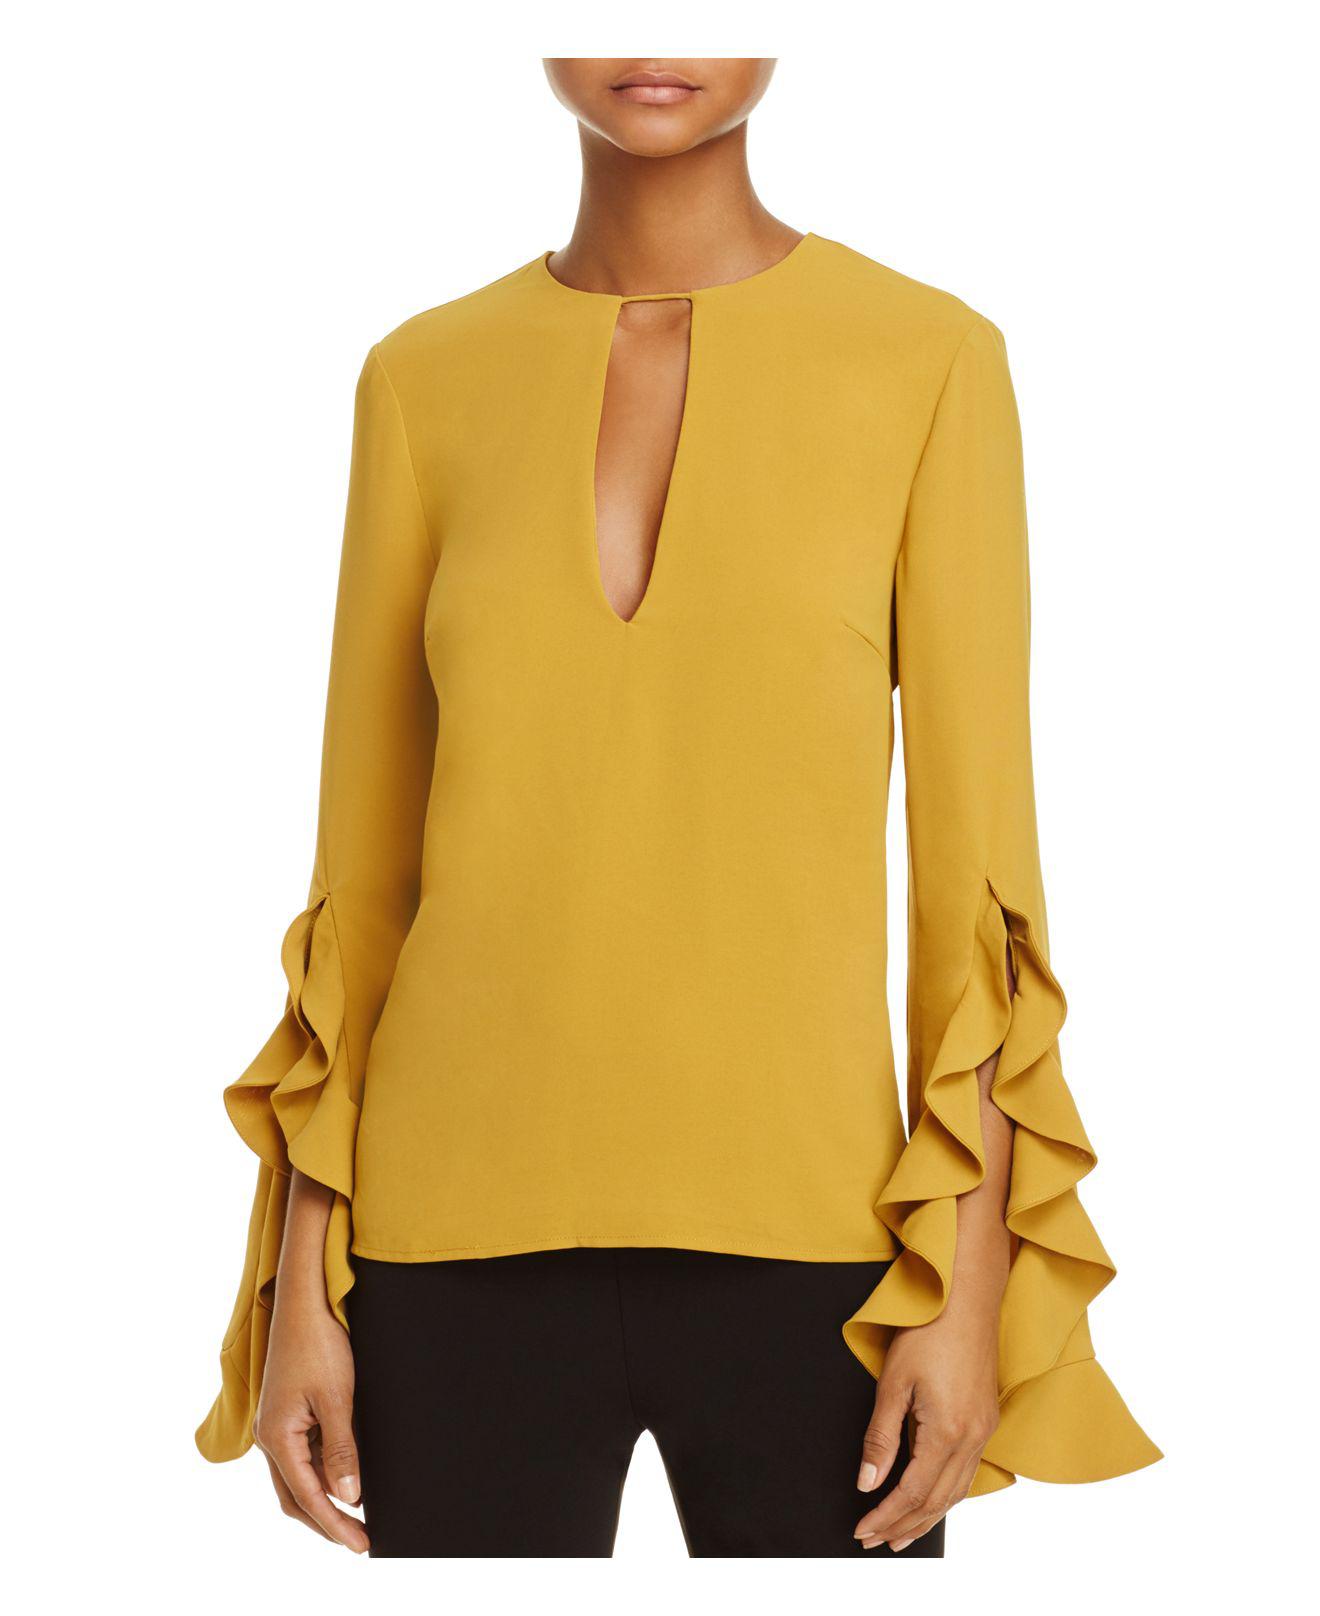 Lyst - C/Meo Collective Gossamer Ruffled-sleeve Top in Yellow